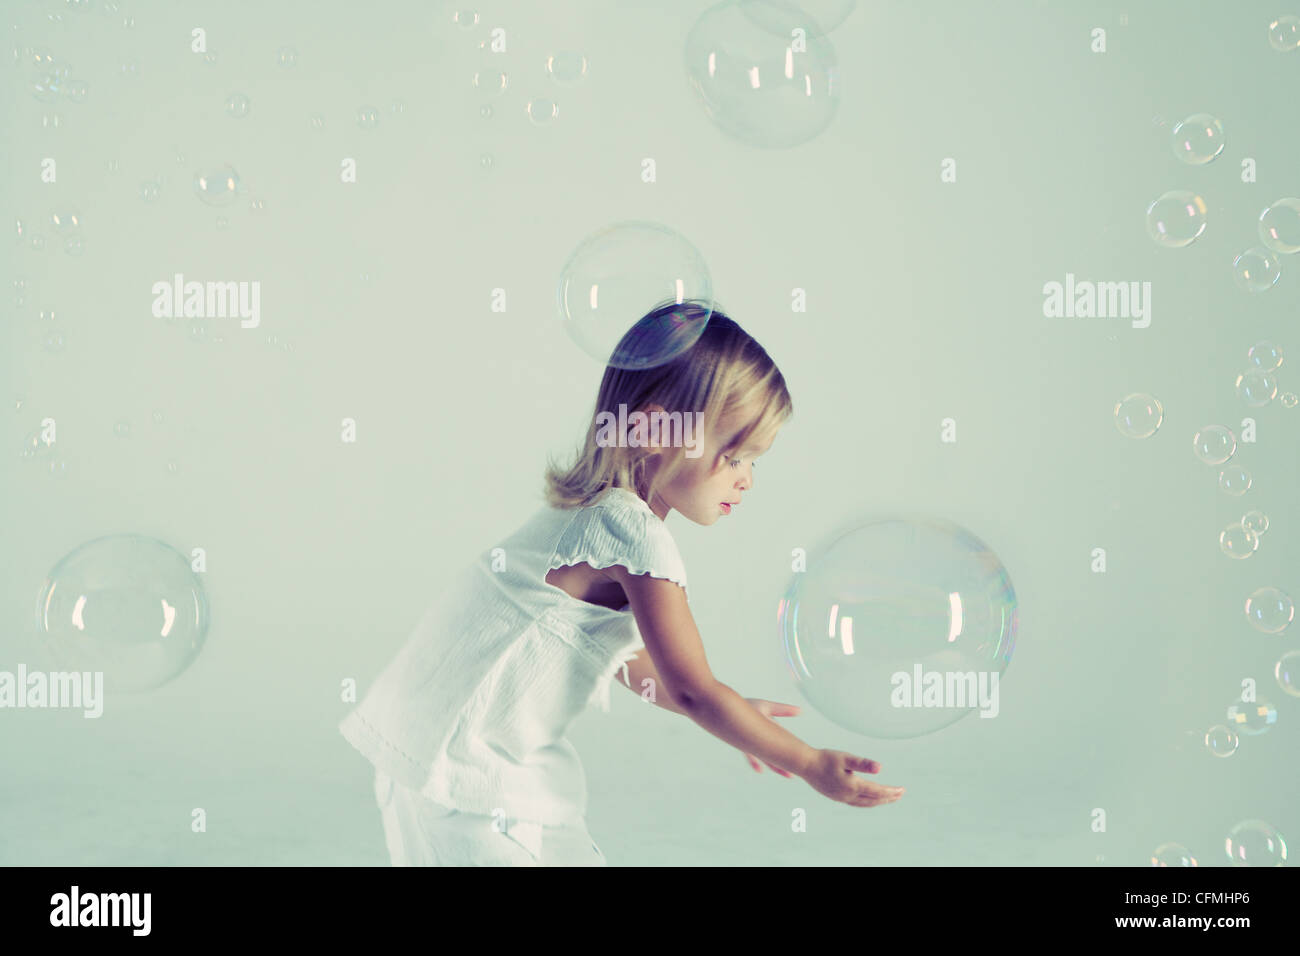 Studio shot of girl Playing with bubbles Banque D'Images